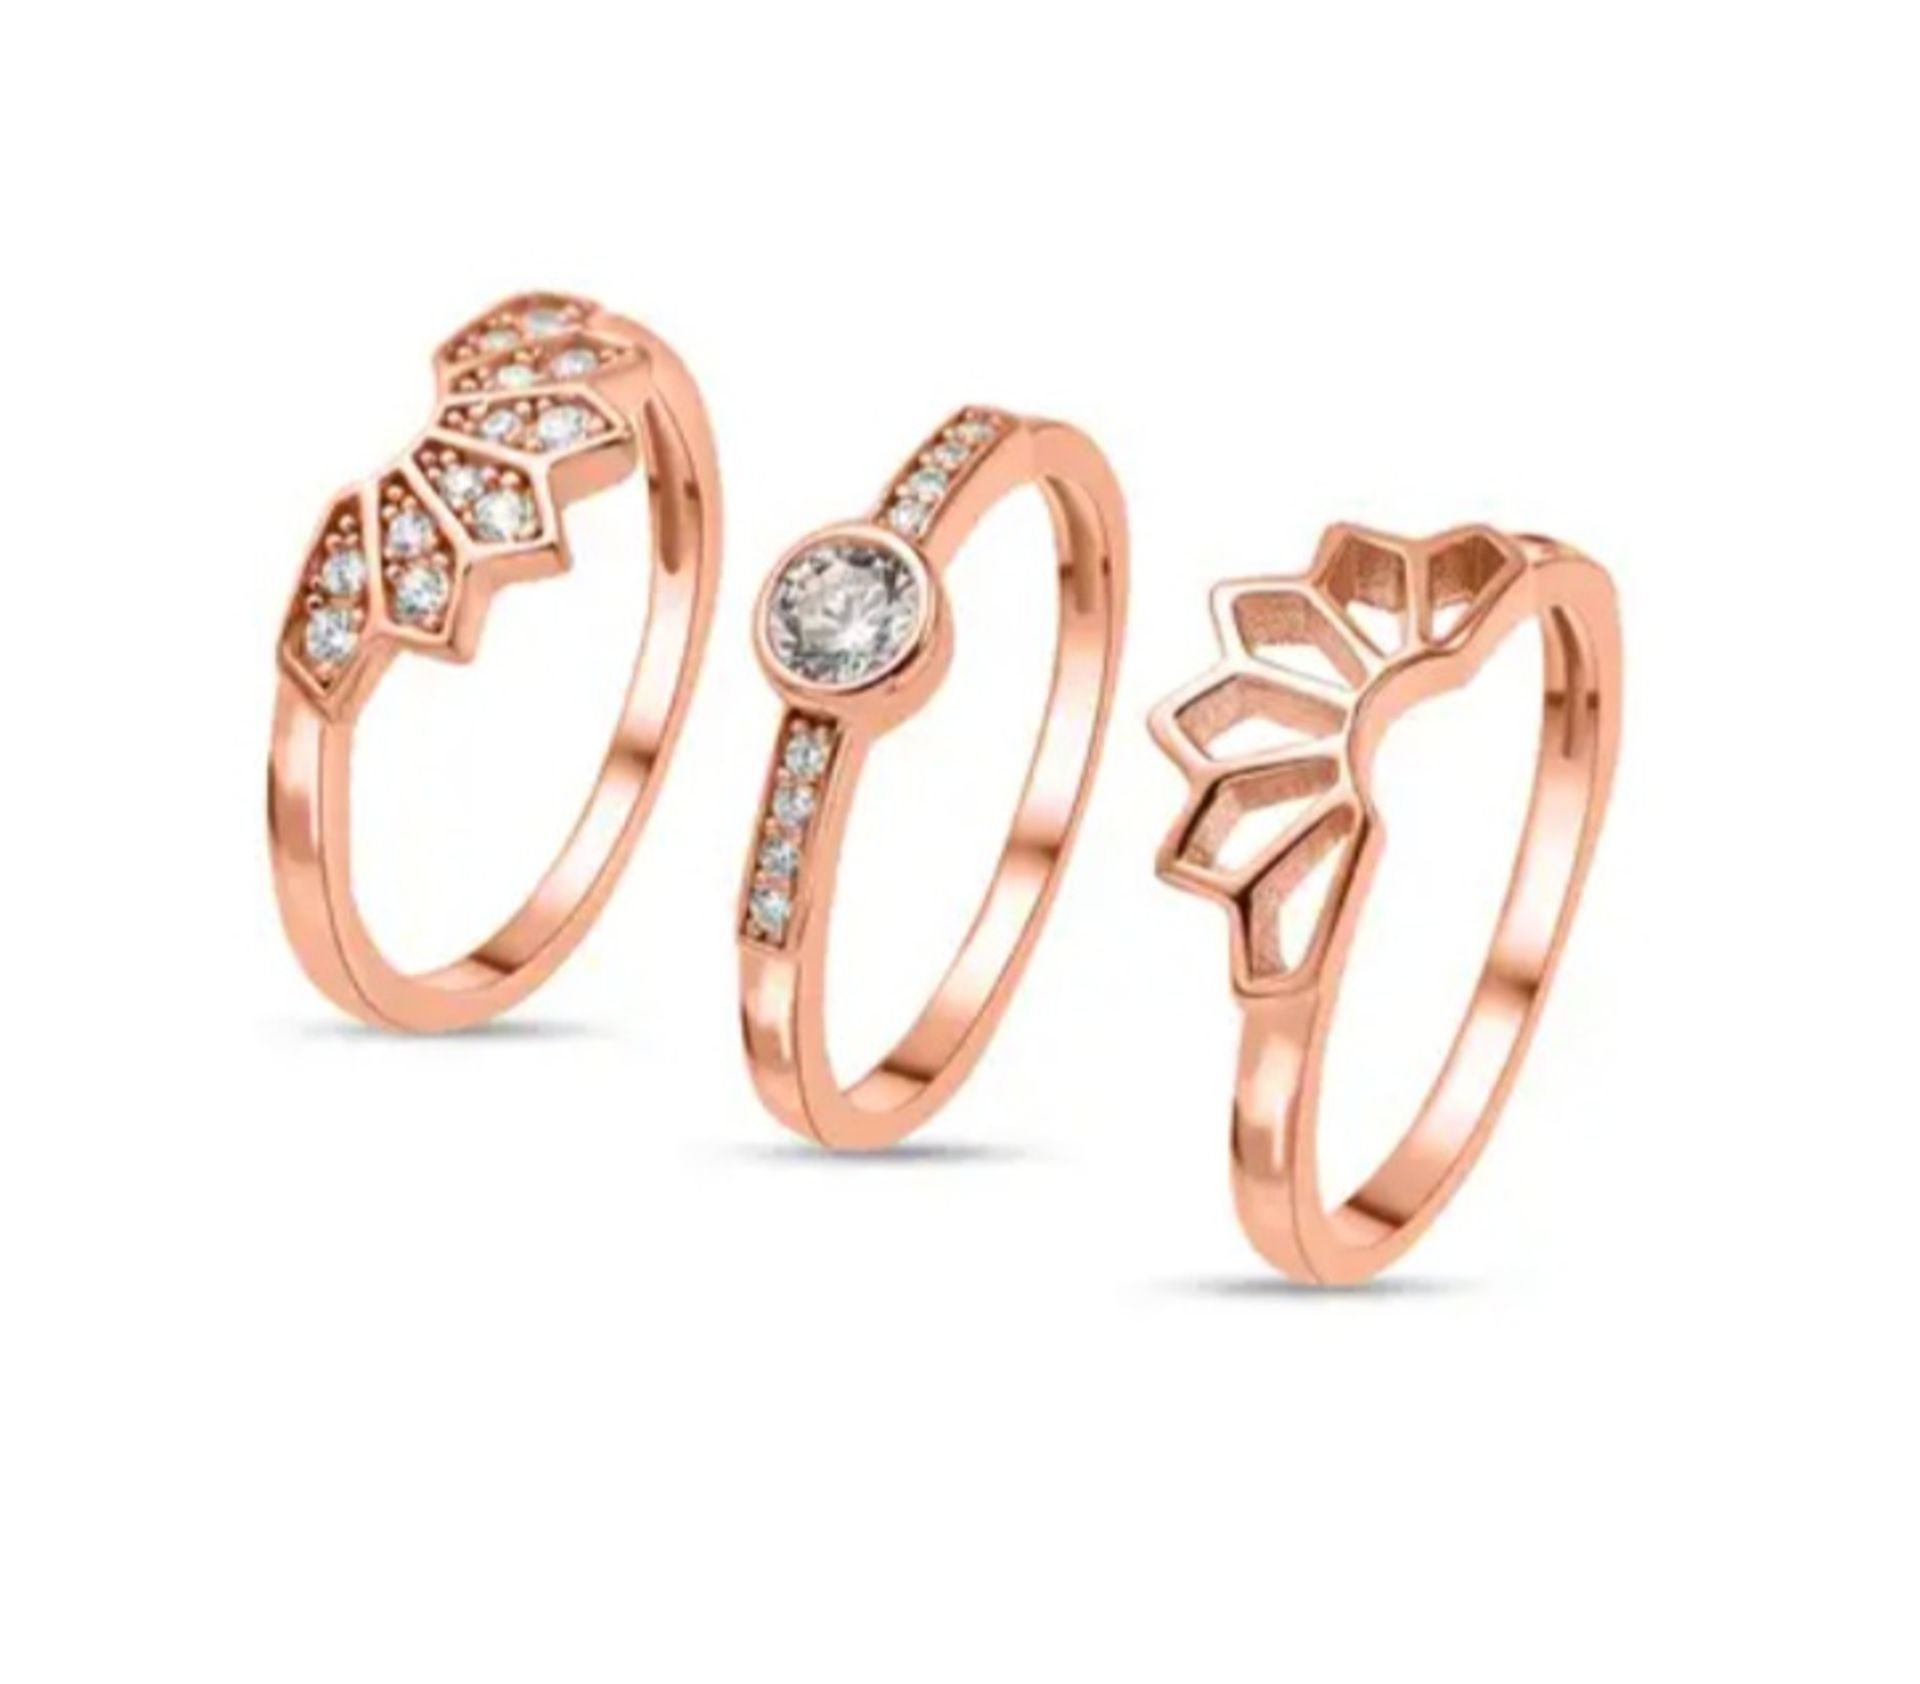 New! Set of 3 - White Cubic Zirconia Ring in 18K Vermeil Rose Gold Sterling Silver - Image 3 of 4